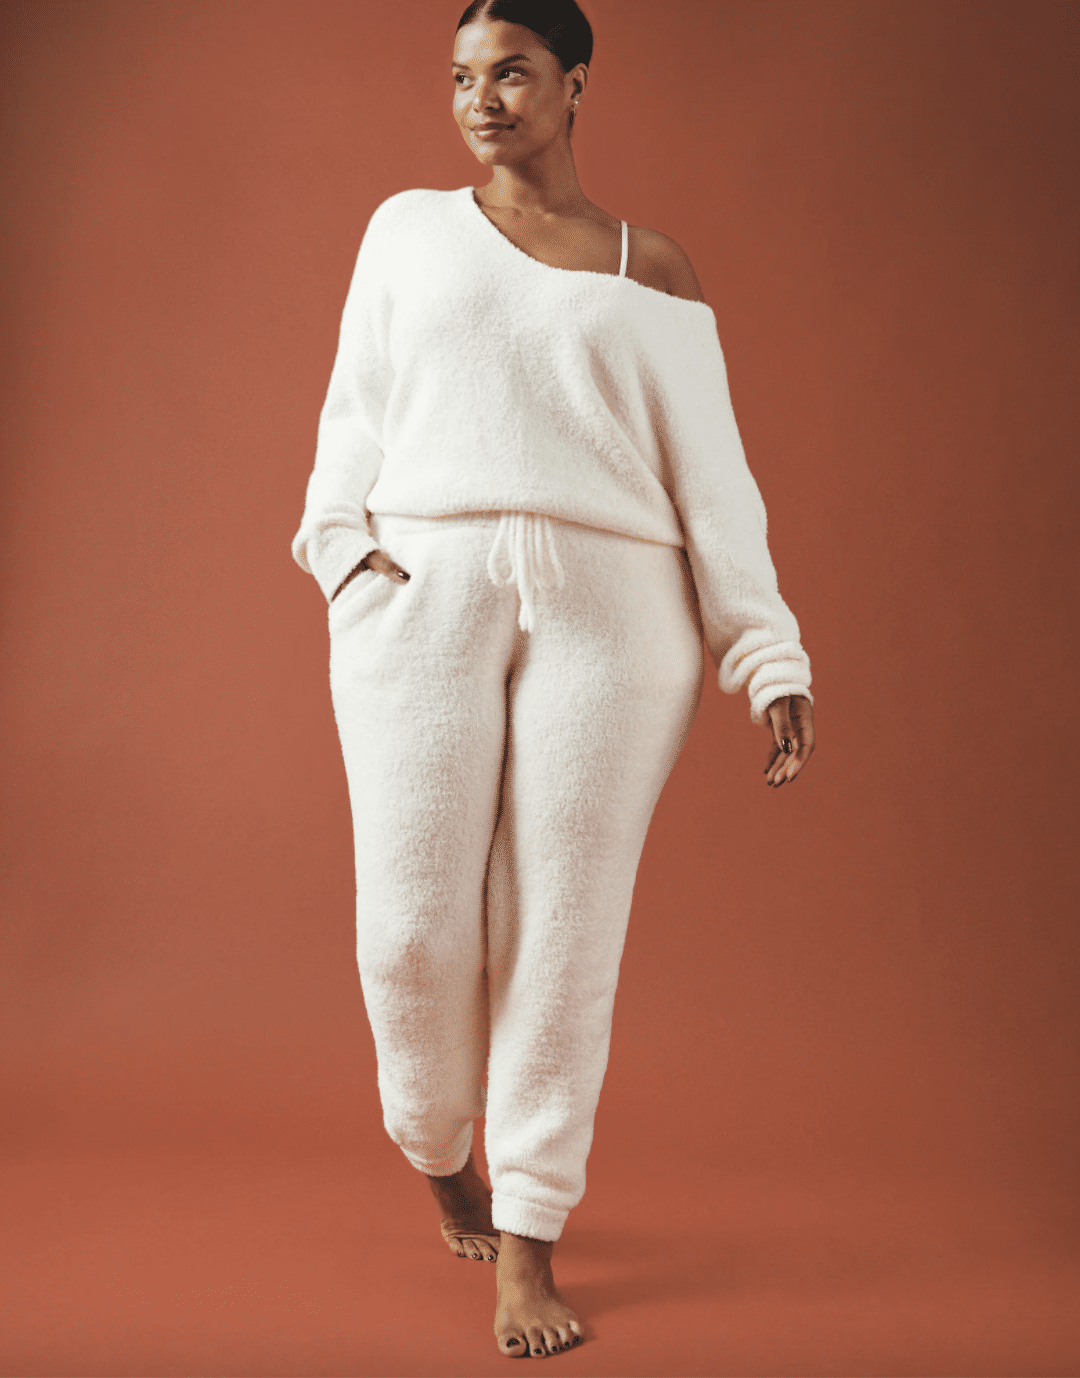 Knitted Loungewear Sets, by Blogger What The Fab